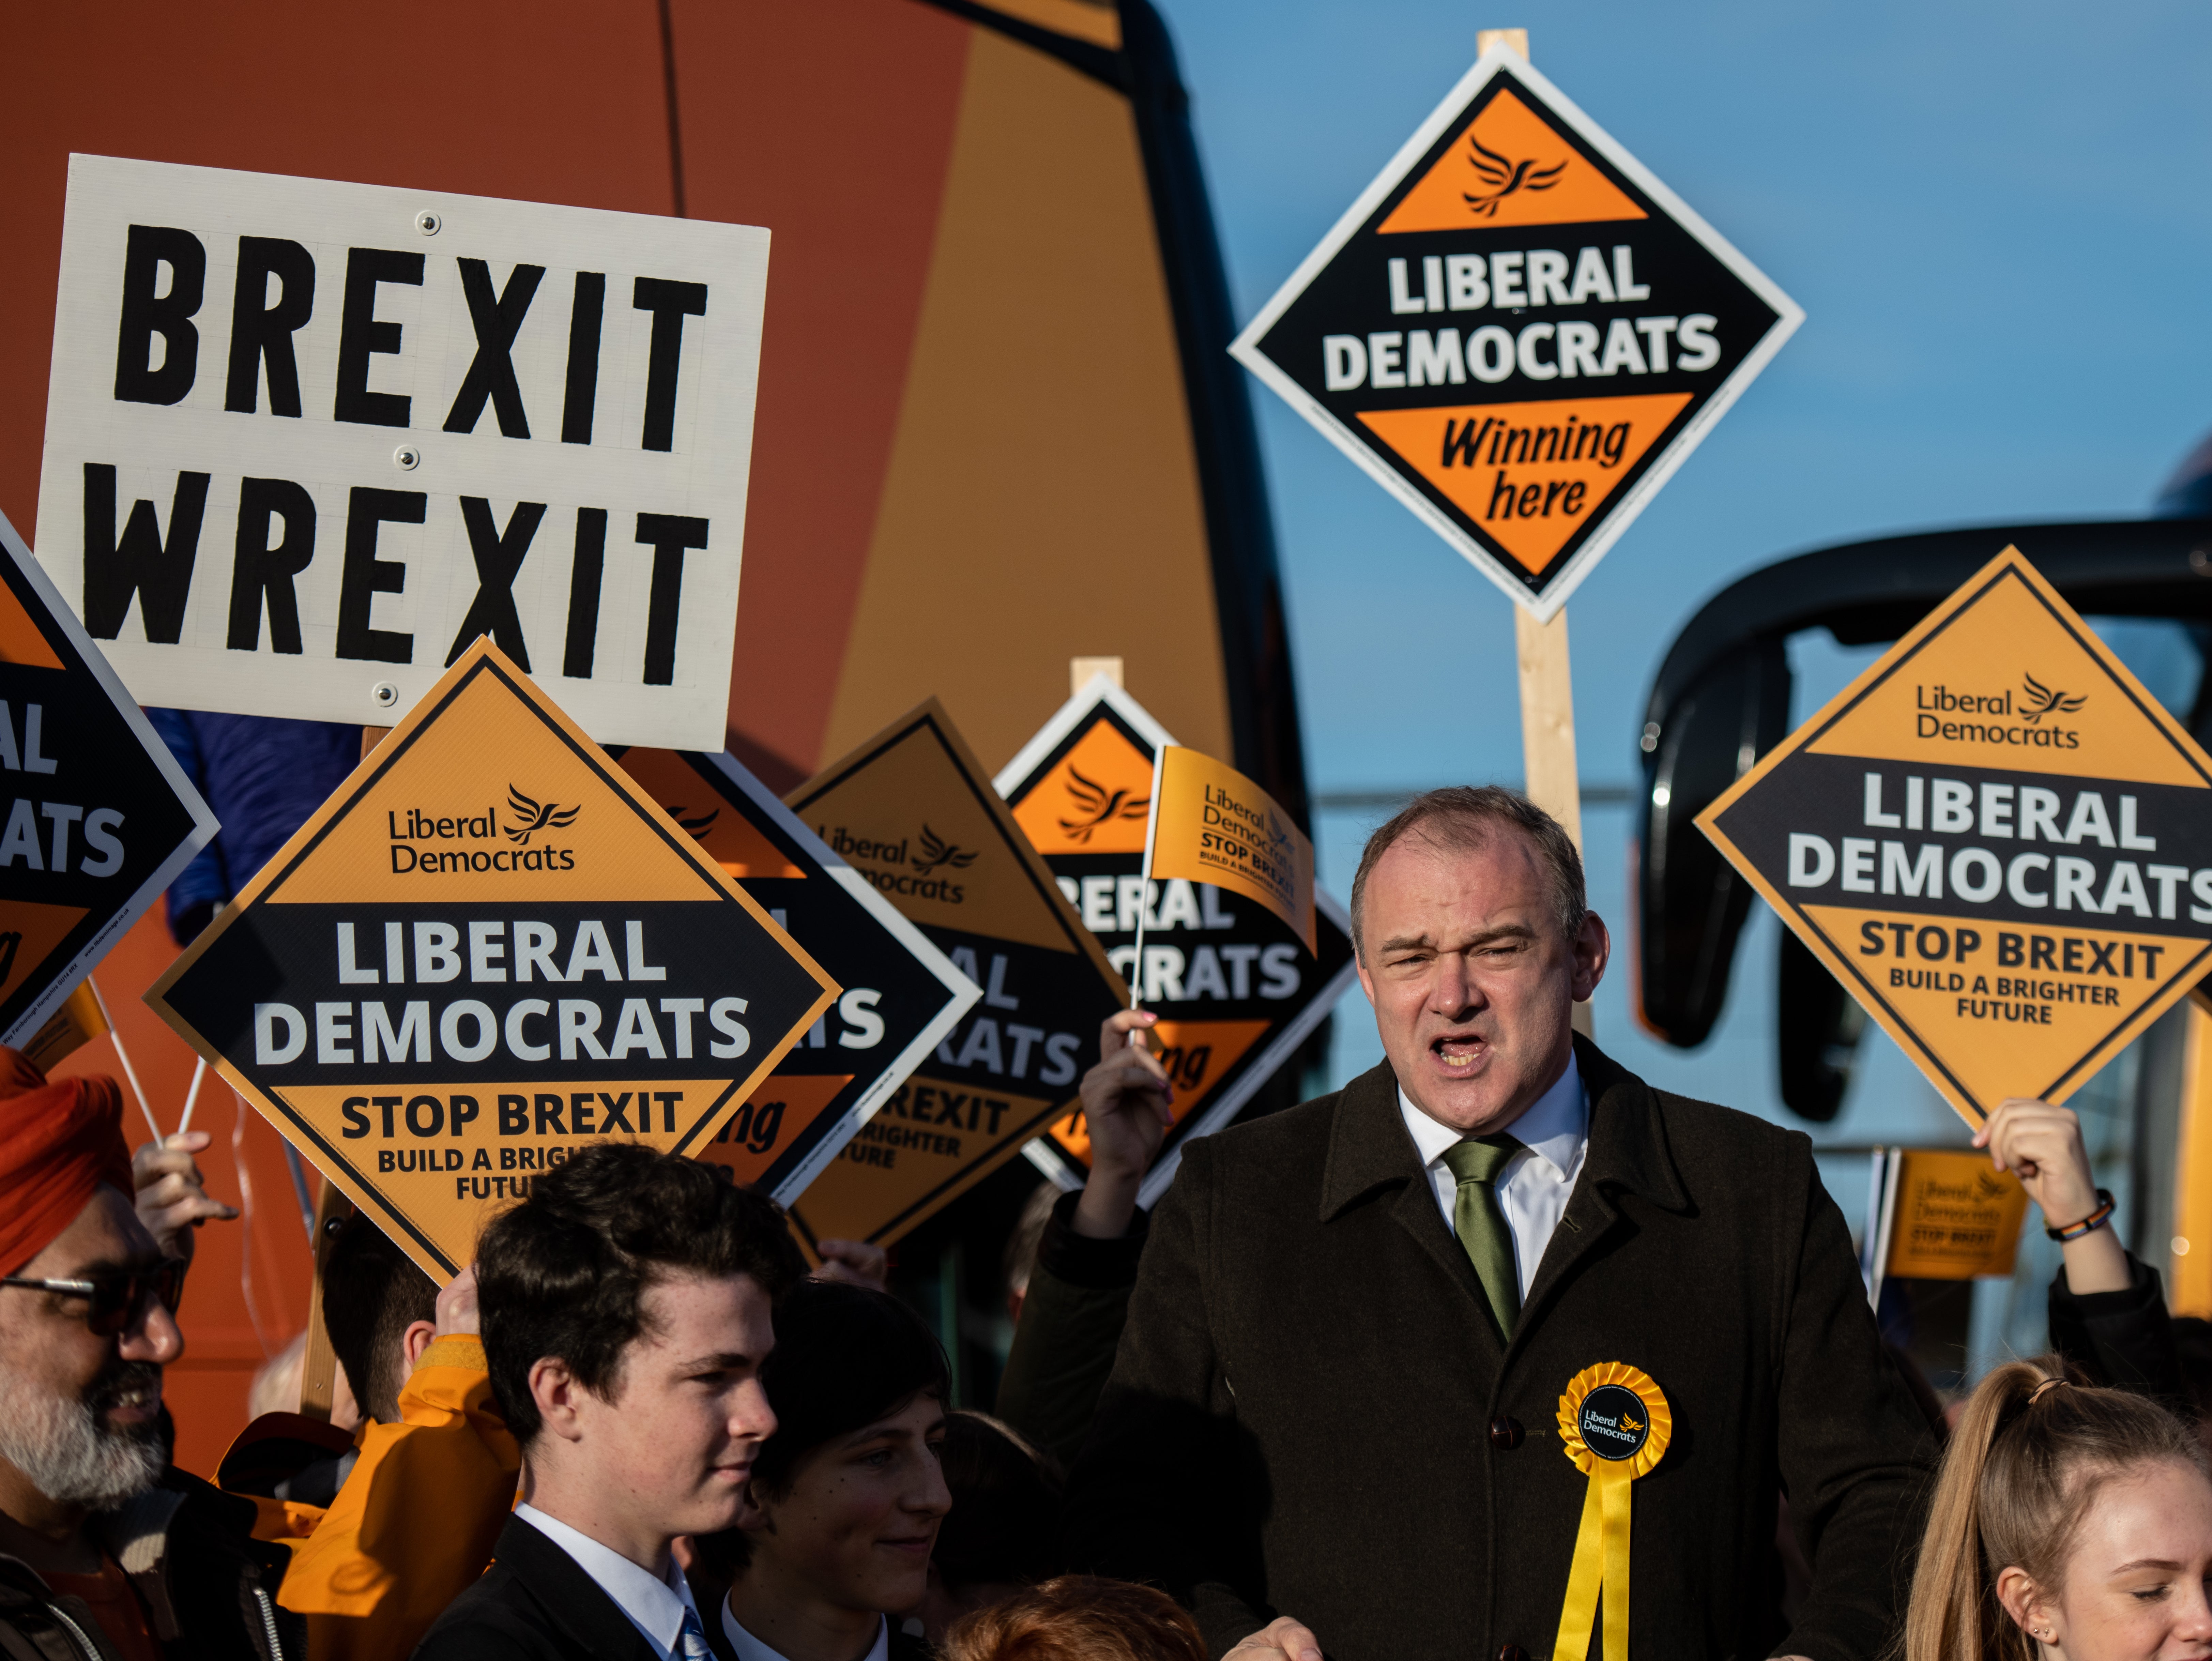 Ed Davey hit out at Brexit, the UK government and the SNP in one go